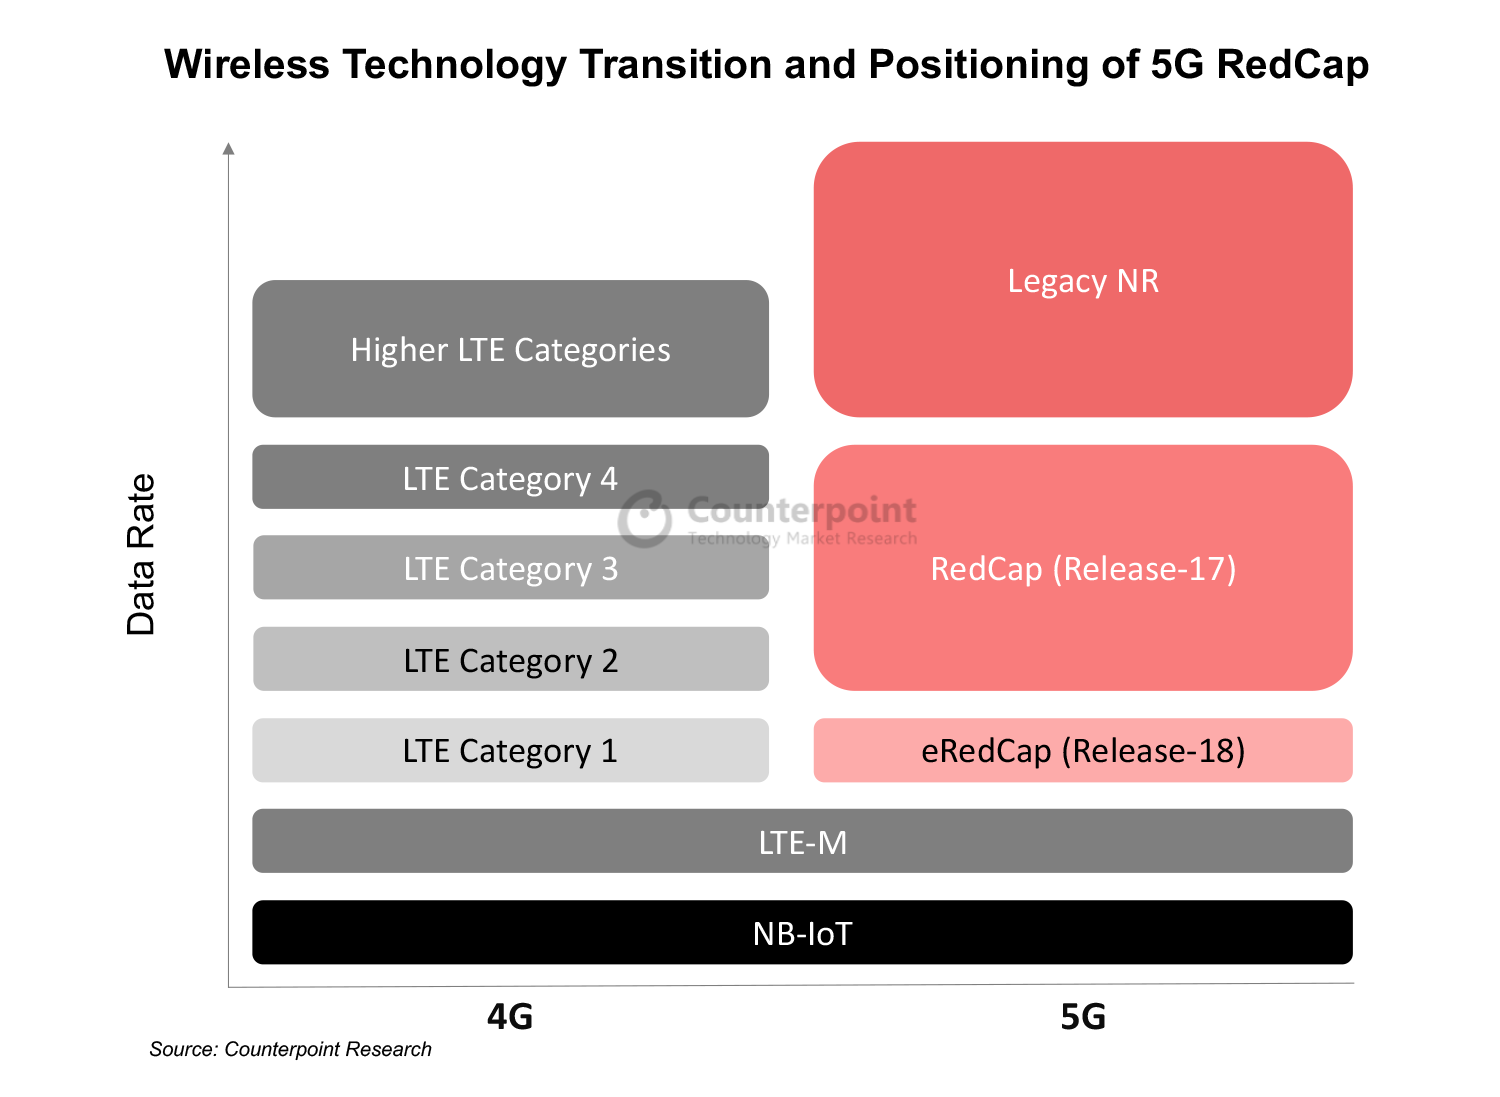 Wireless technology transition and positioning of 5G RedCap